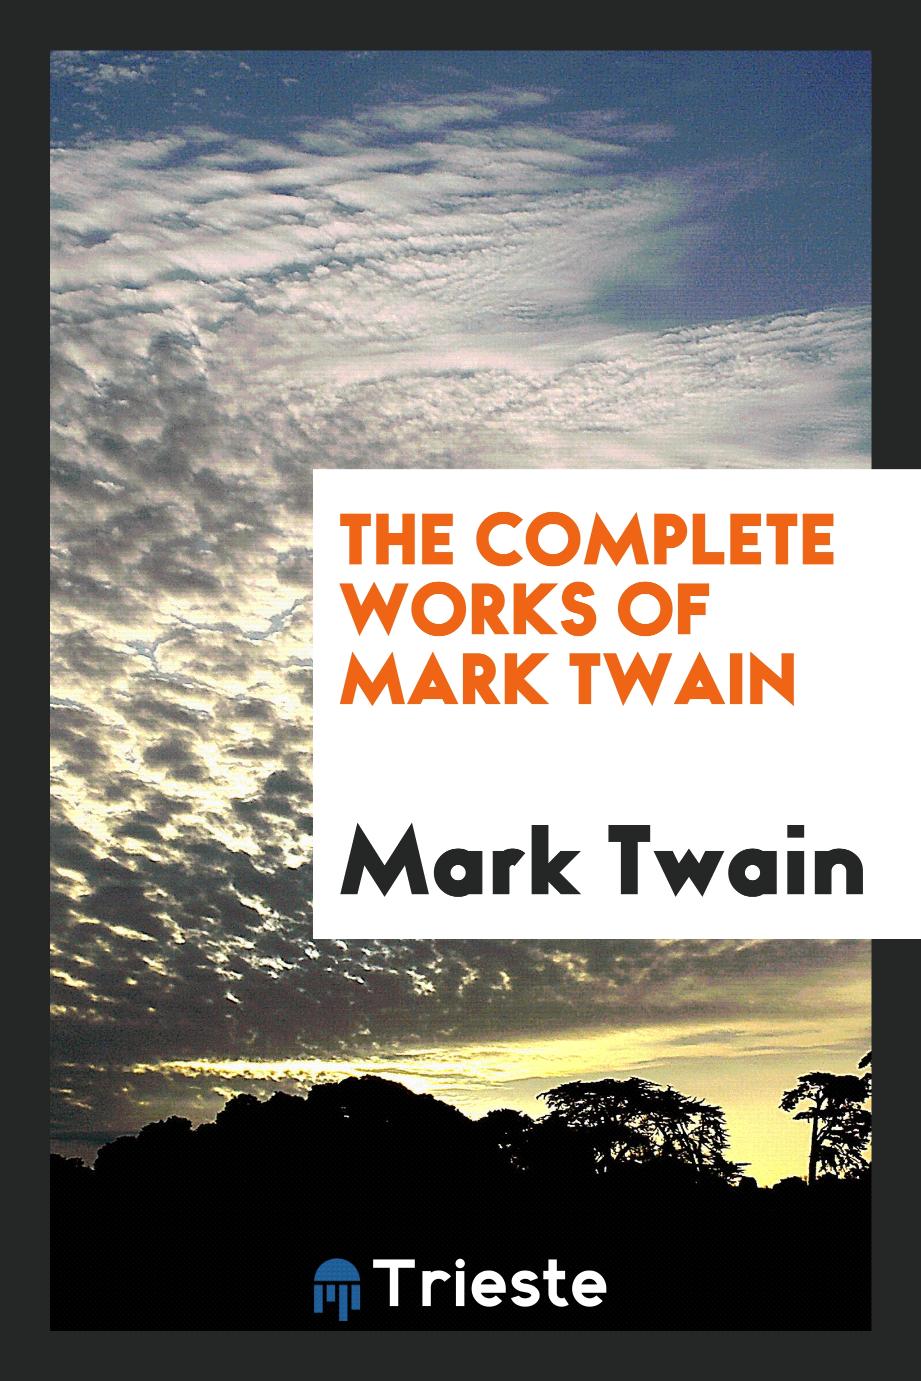 The complete works of Mark Twain